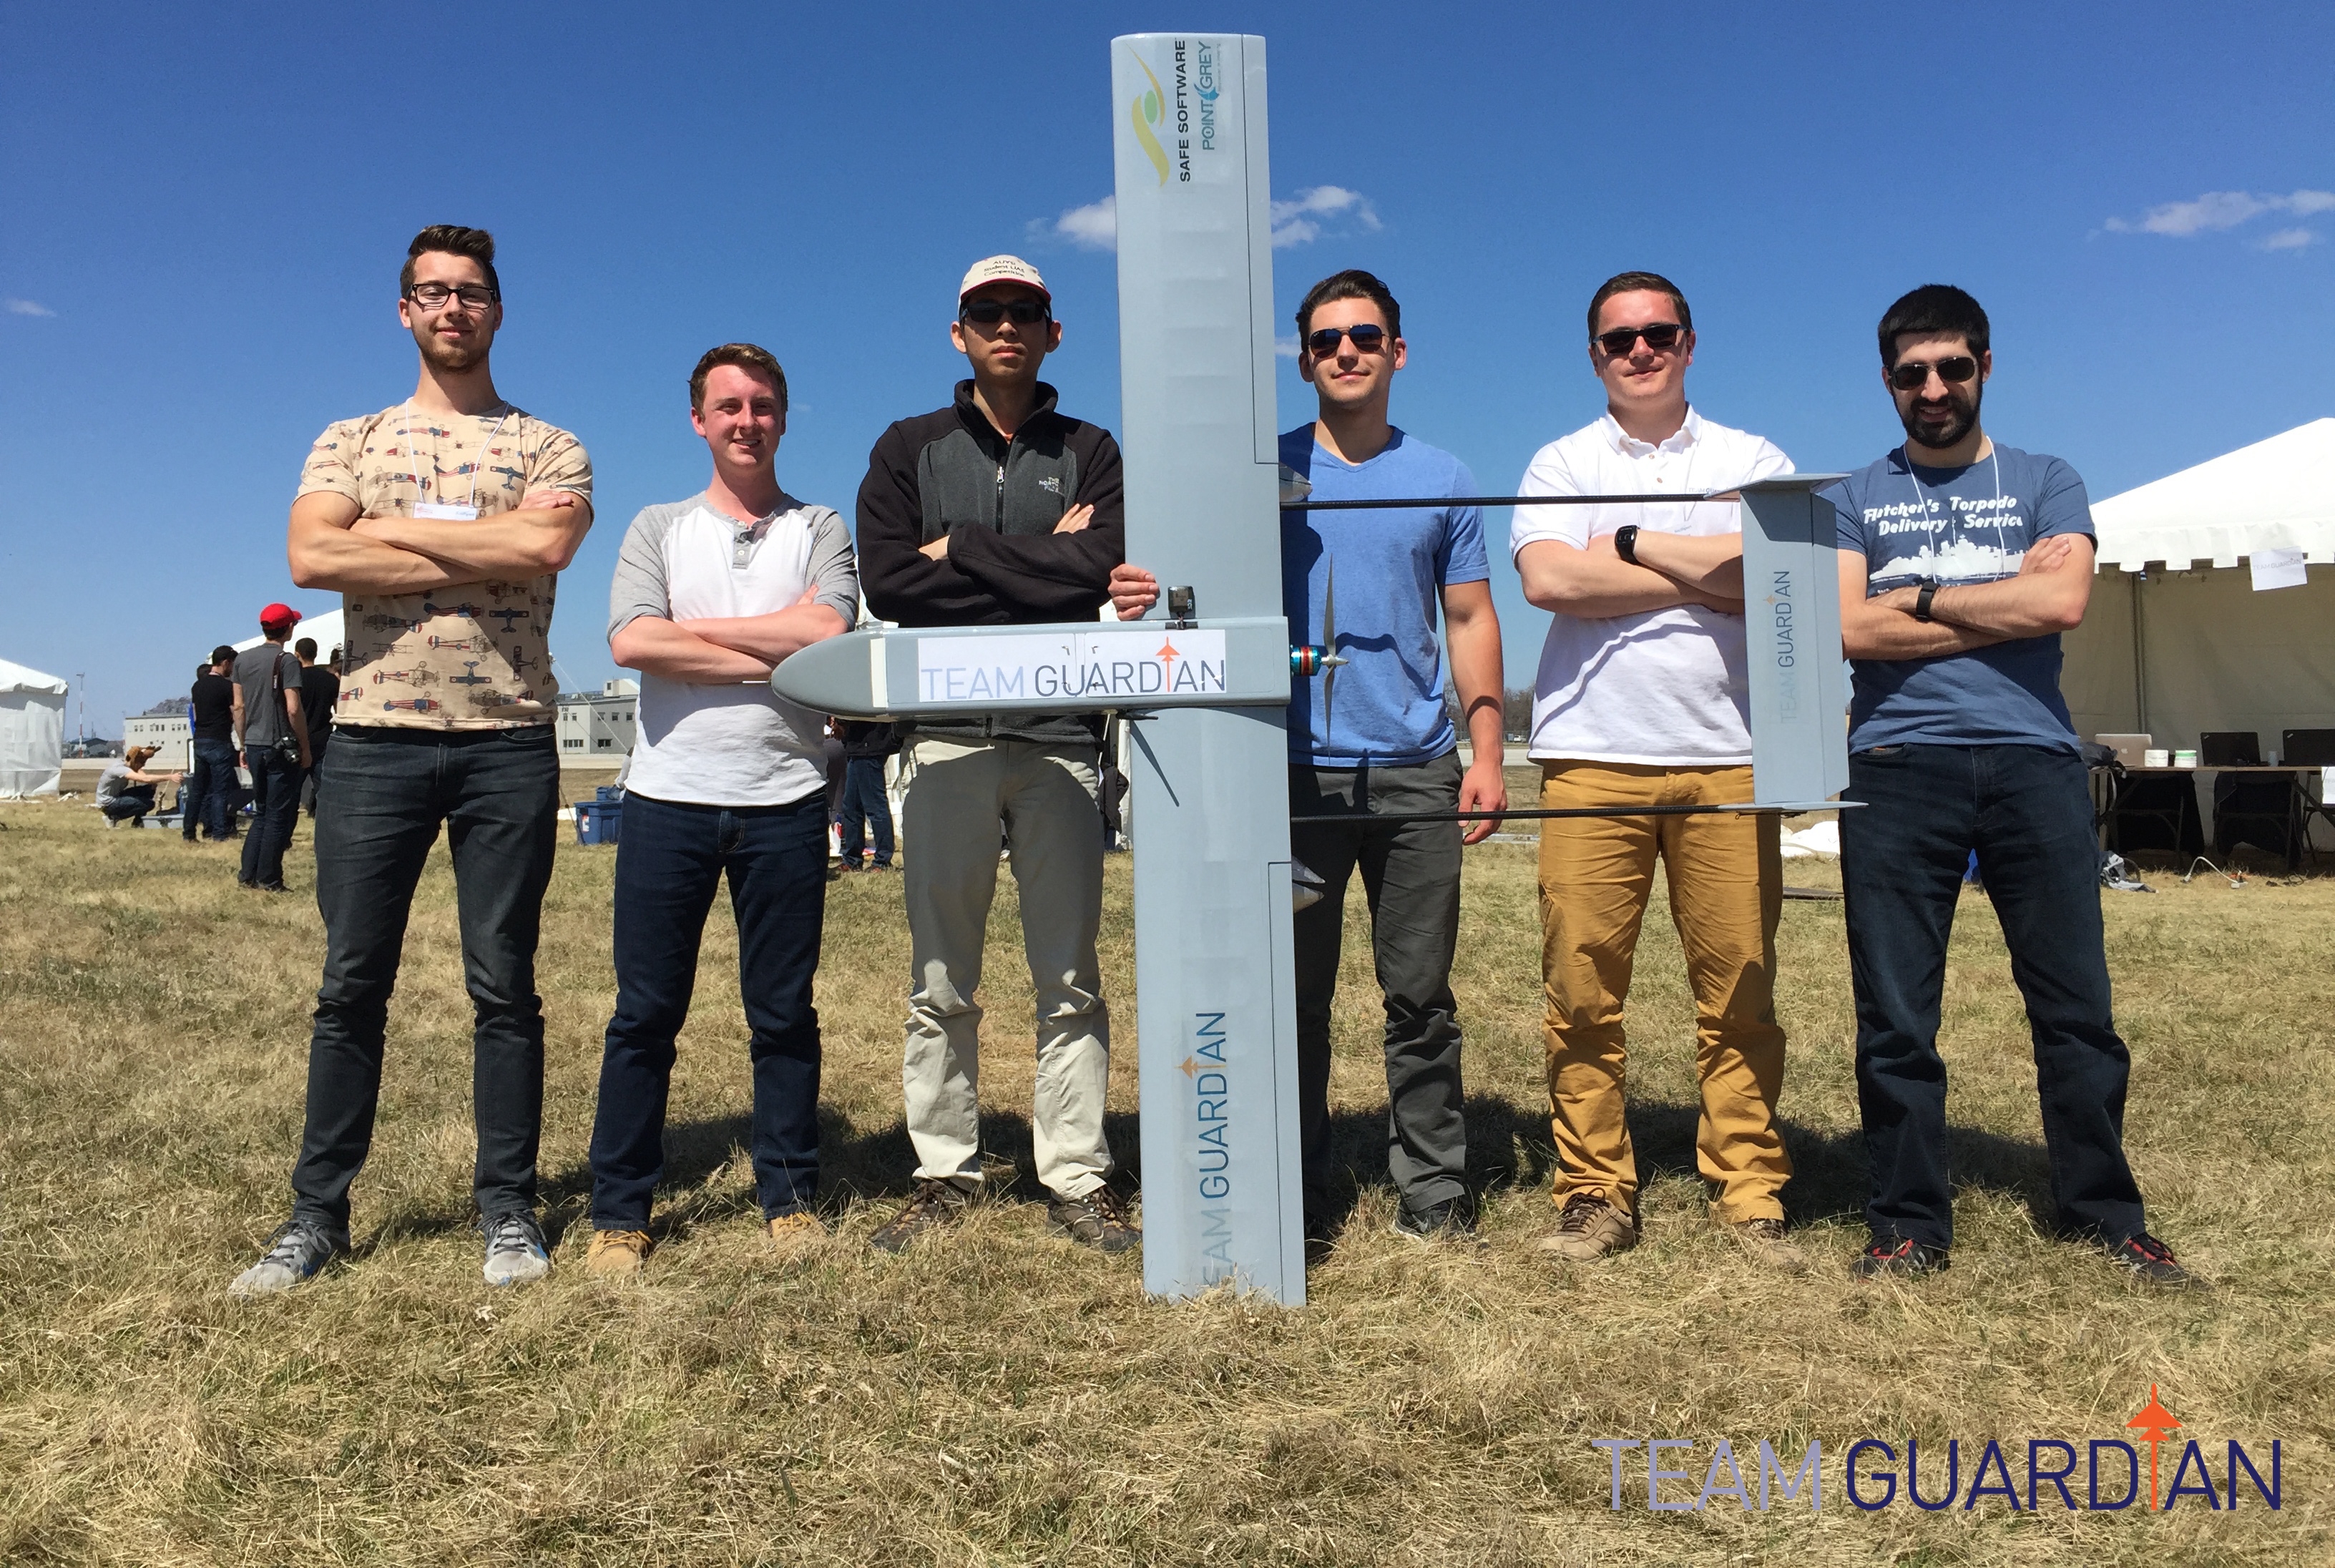 Team Guardian members Kris Gjernes, Richard Arthurs, Allan Lee, Mike Kontanist, Nikita Bazhanov and Josh Vazquez pose with Hugin, one of their unmanned aerial vehicles. Hugin was the team's competition plane in 2015 and 2016.